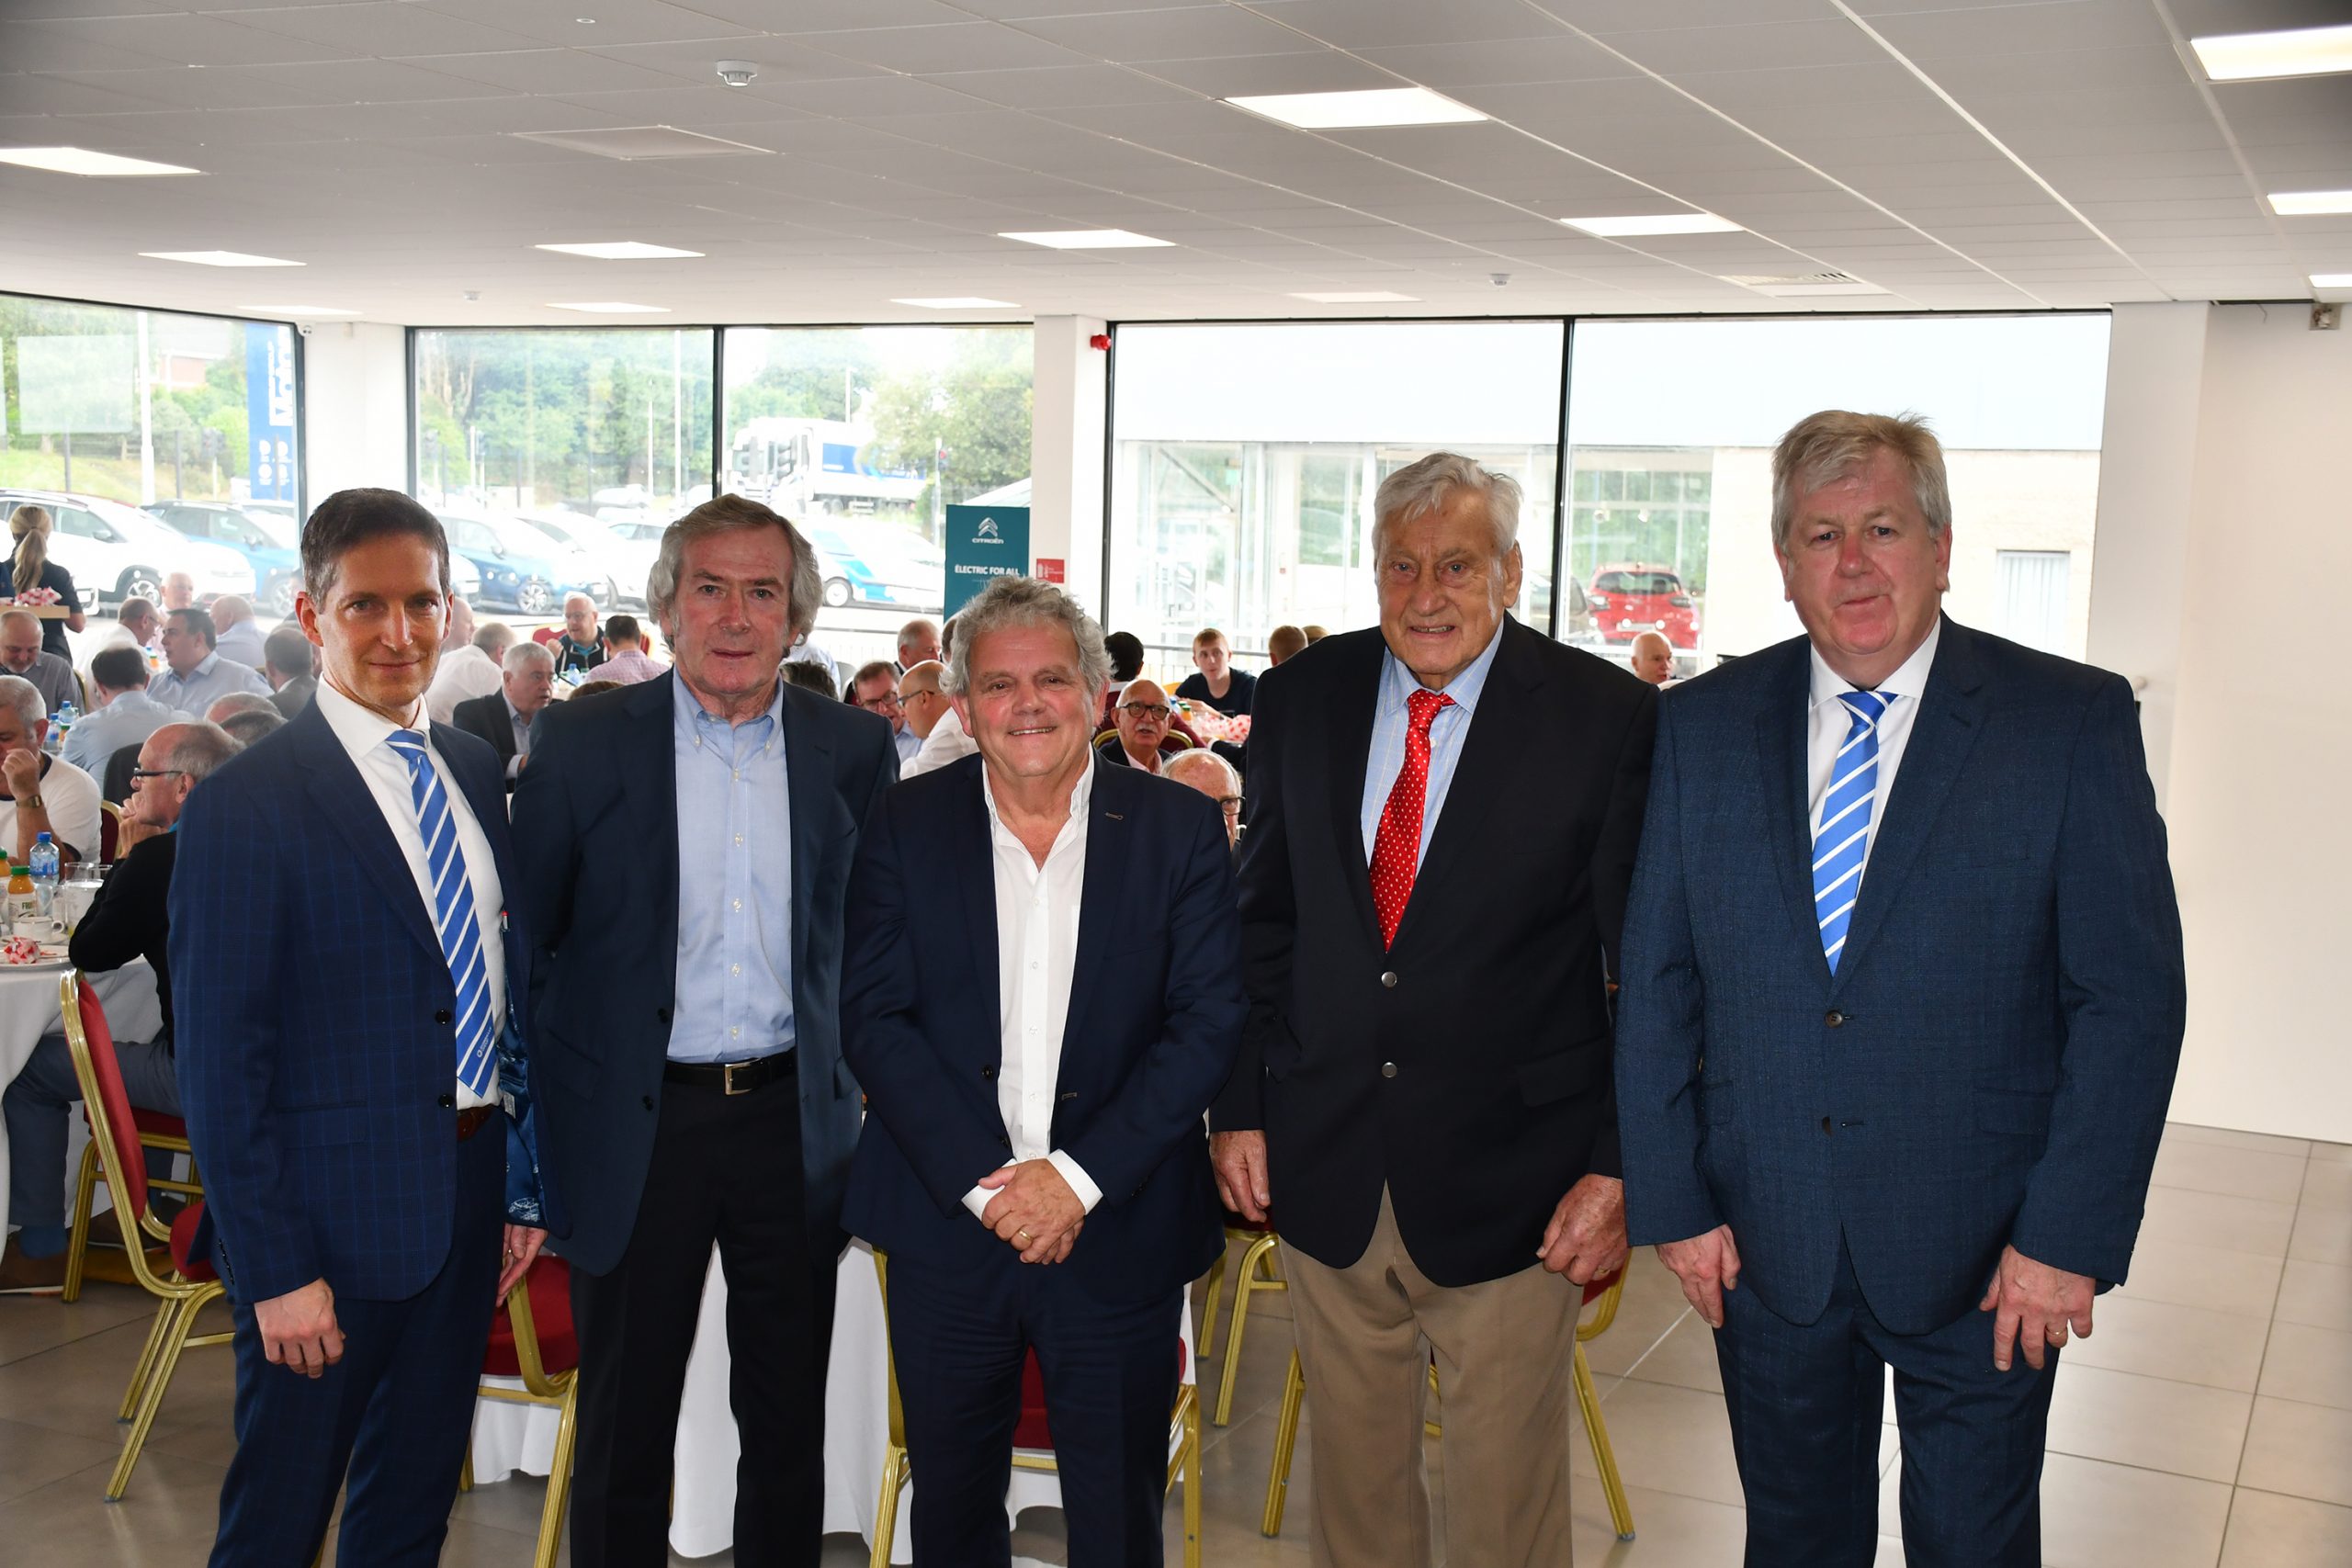 Paul Compton, Pat Jennings, Adrian Logan, Willie John McBride and Raymond Donnelly at business breakfast